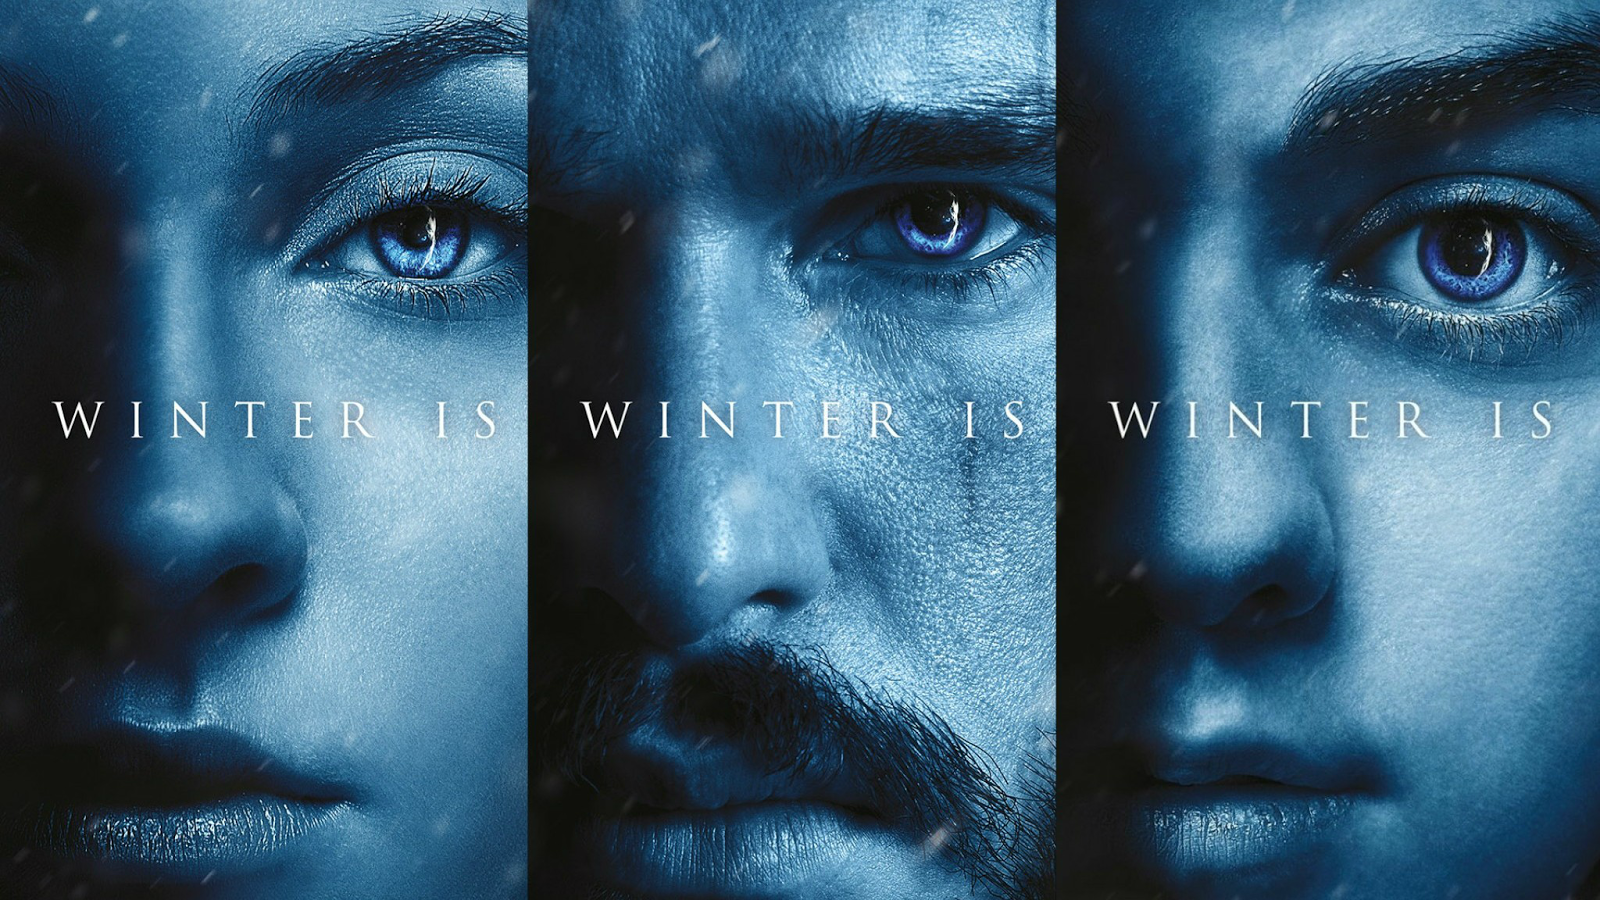 The Stark siblings; Sansa, Jon, and Arya in their individual character posters for Game of Thrones Season 7